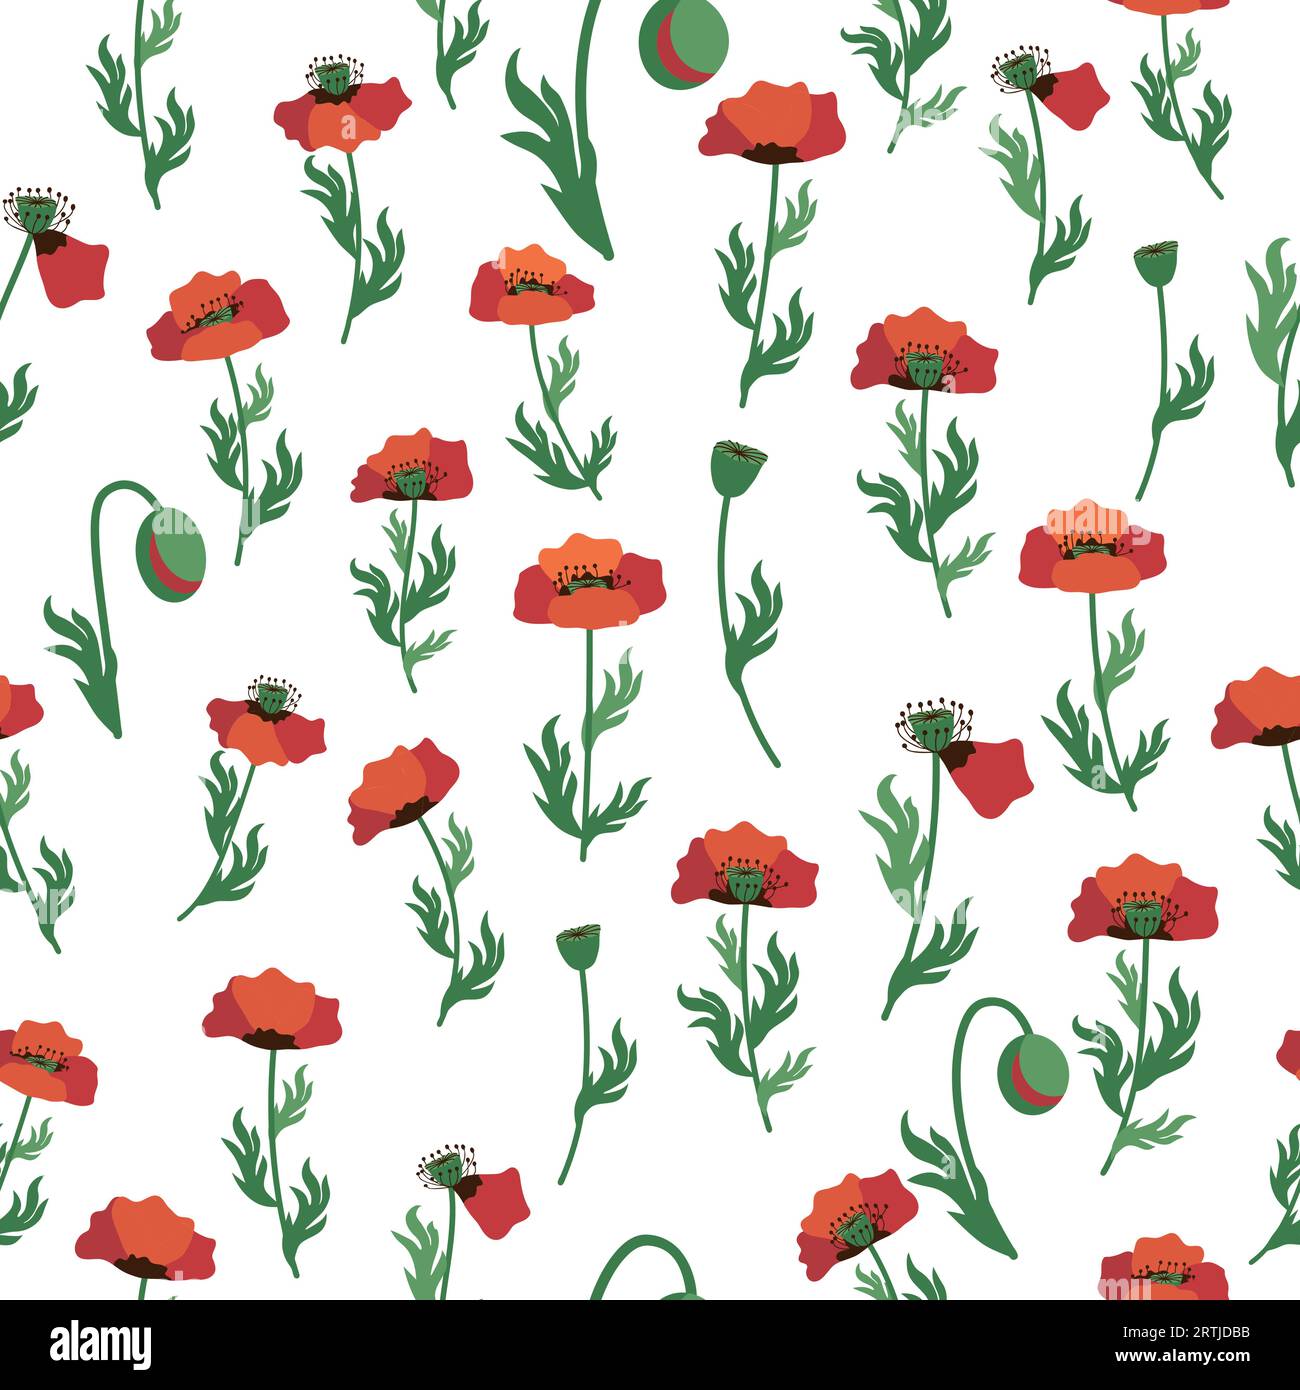 Summer seamless pattern with bright red poppy flowers and poppy pods. Field, meadow of poppies. Stock Vector